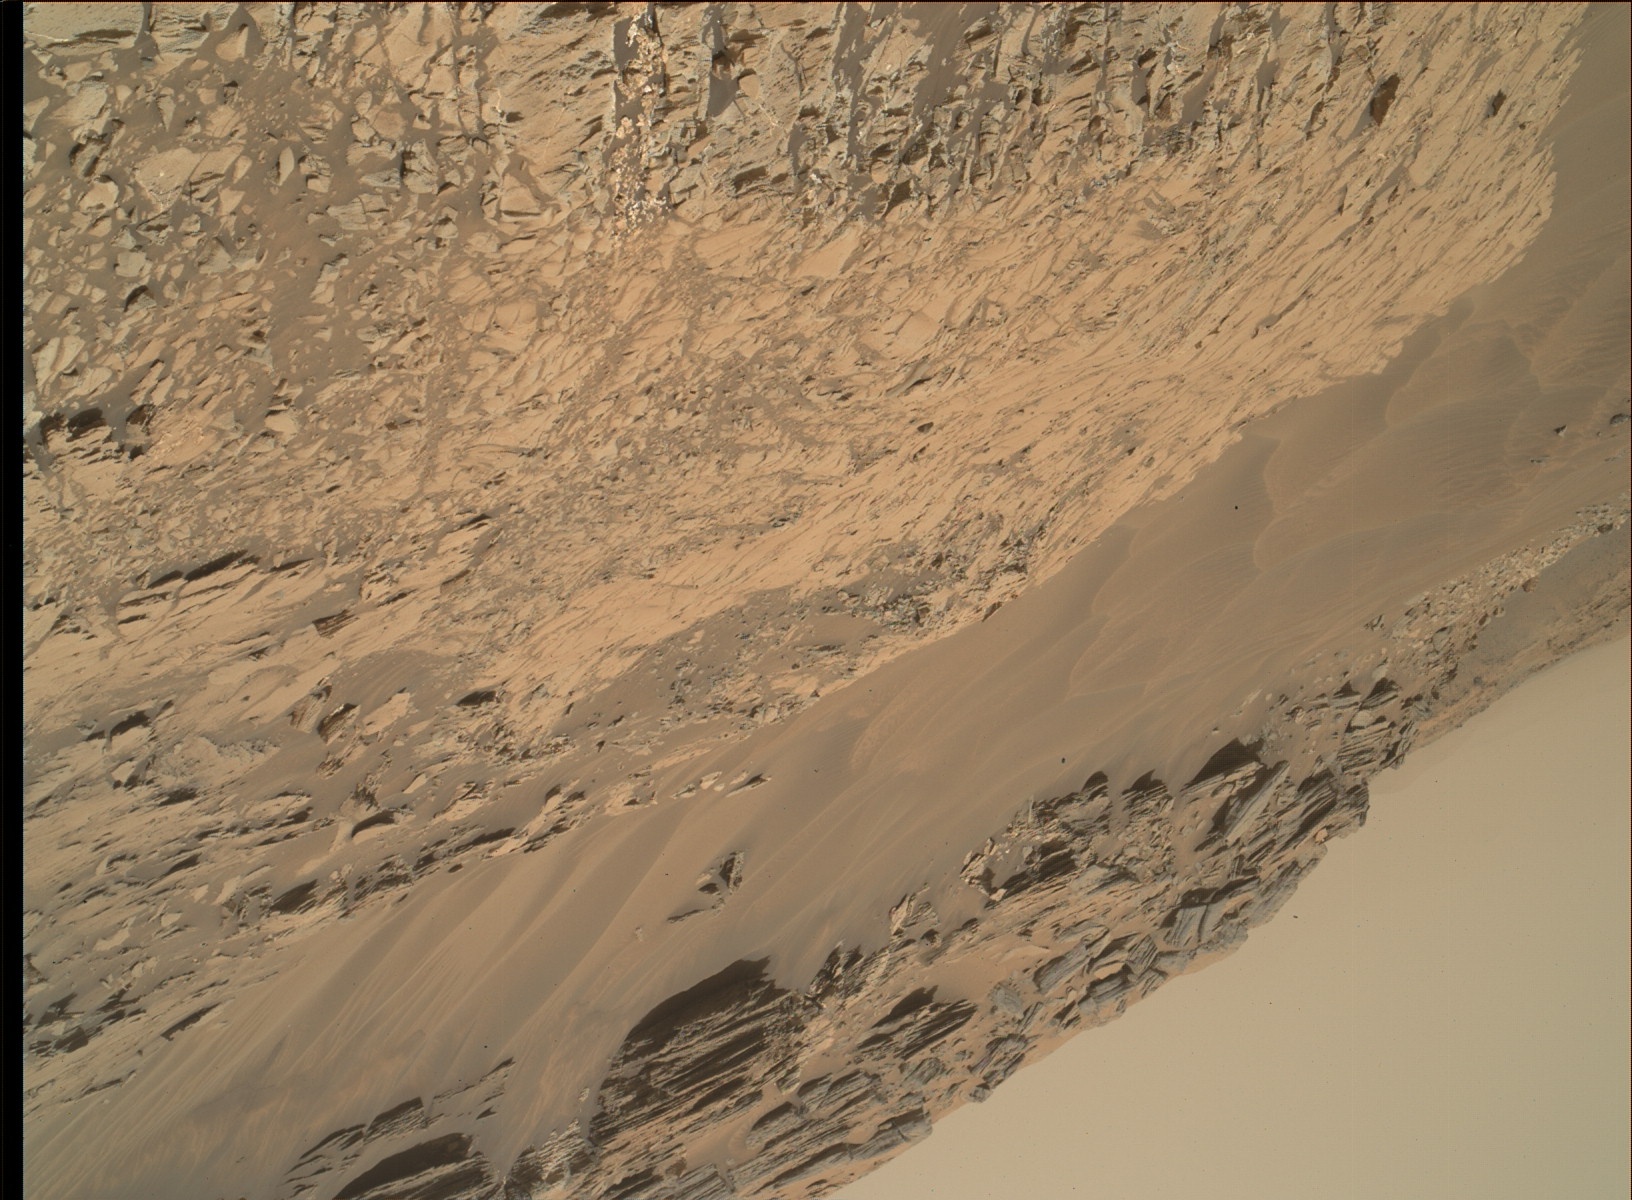 Nasa's Mars rover Curiosity acquired this image using its Mars Hand Lens Imager (MAHLI) on Sol 995